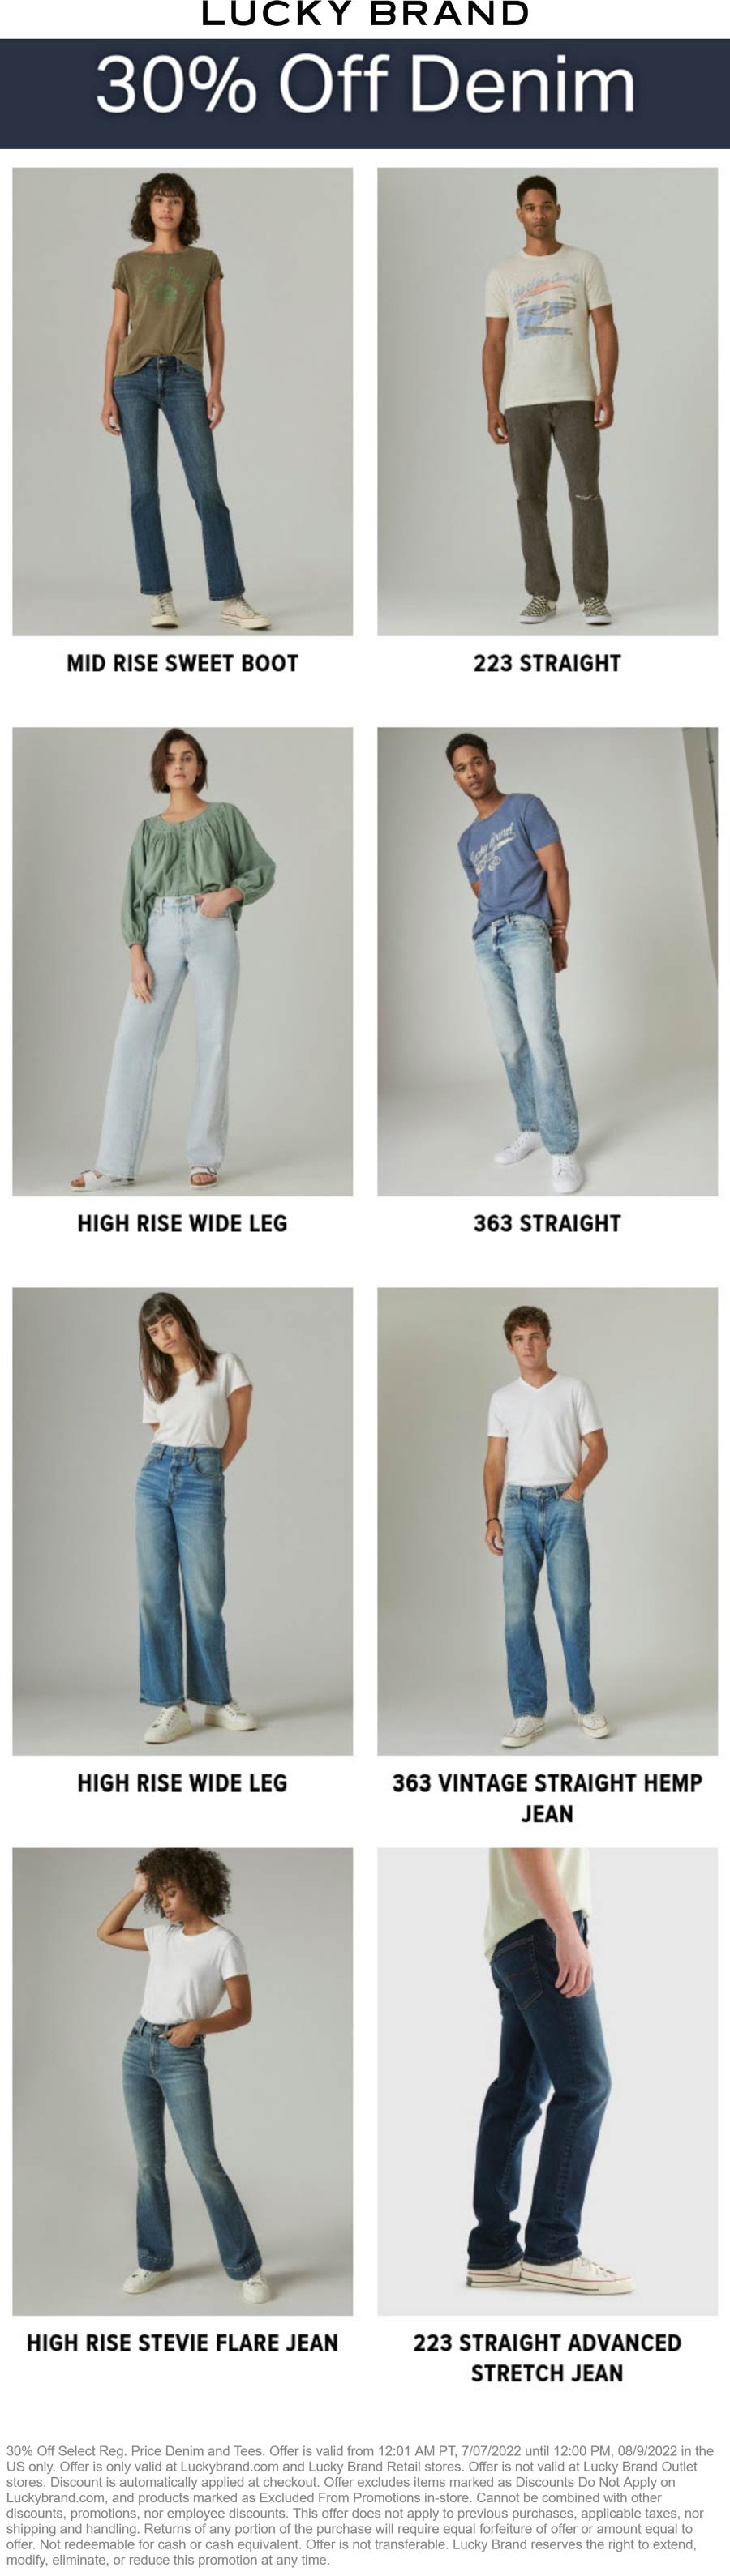 Lucky Brand stores Coupon  30% off denim at Lucky Brand, ditto online #luckybrand 